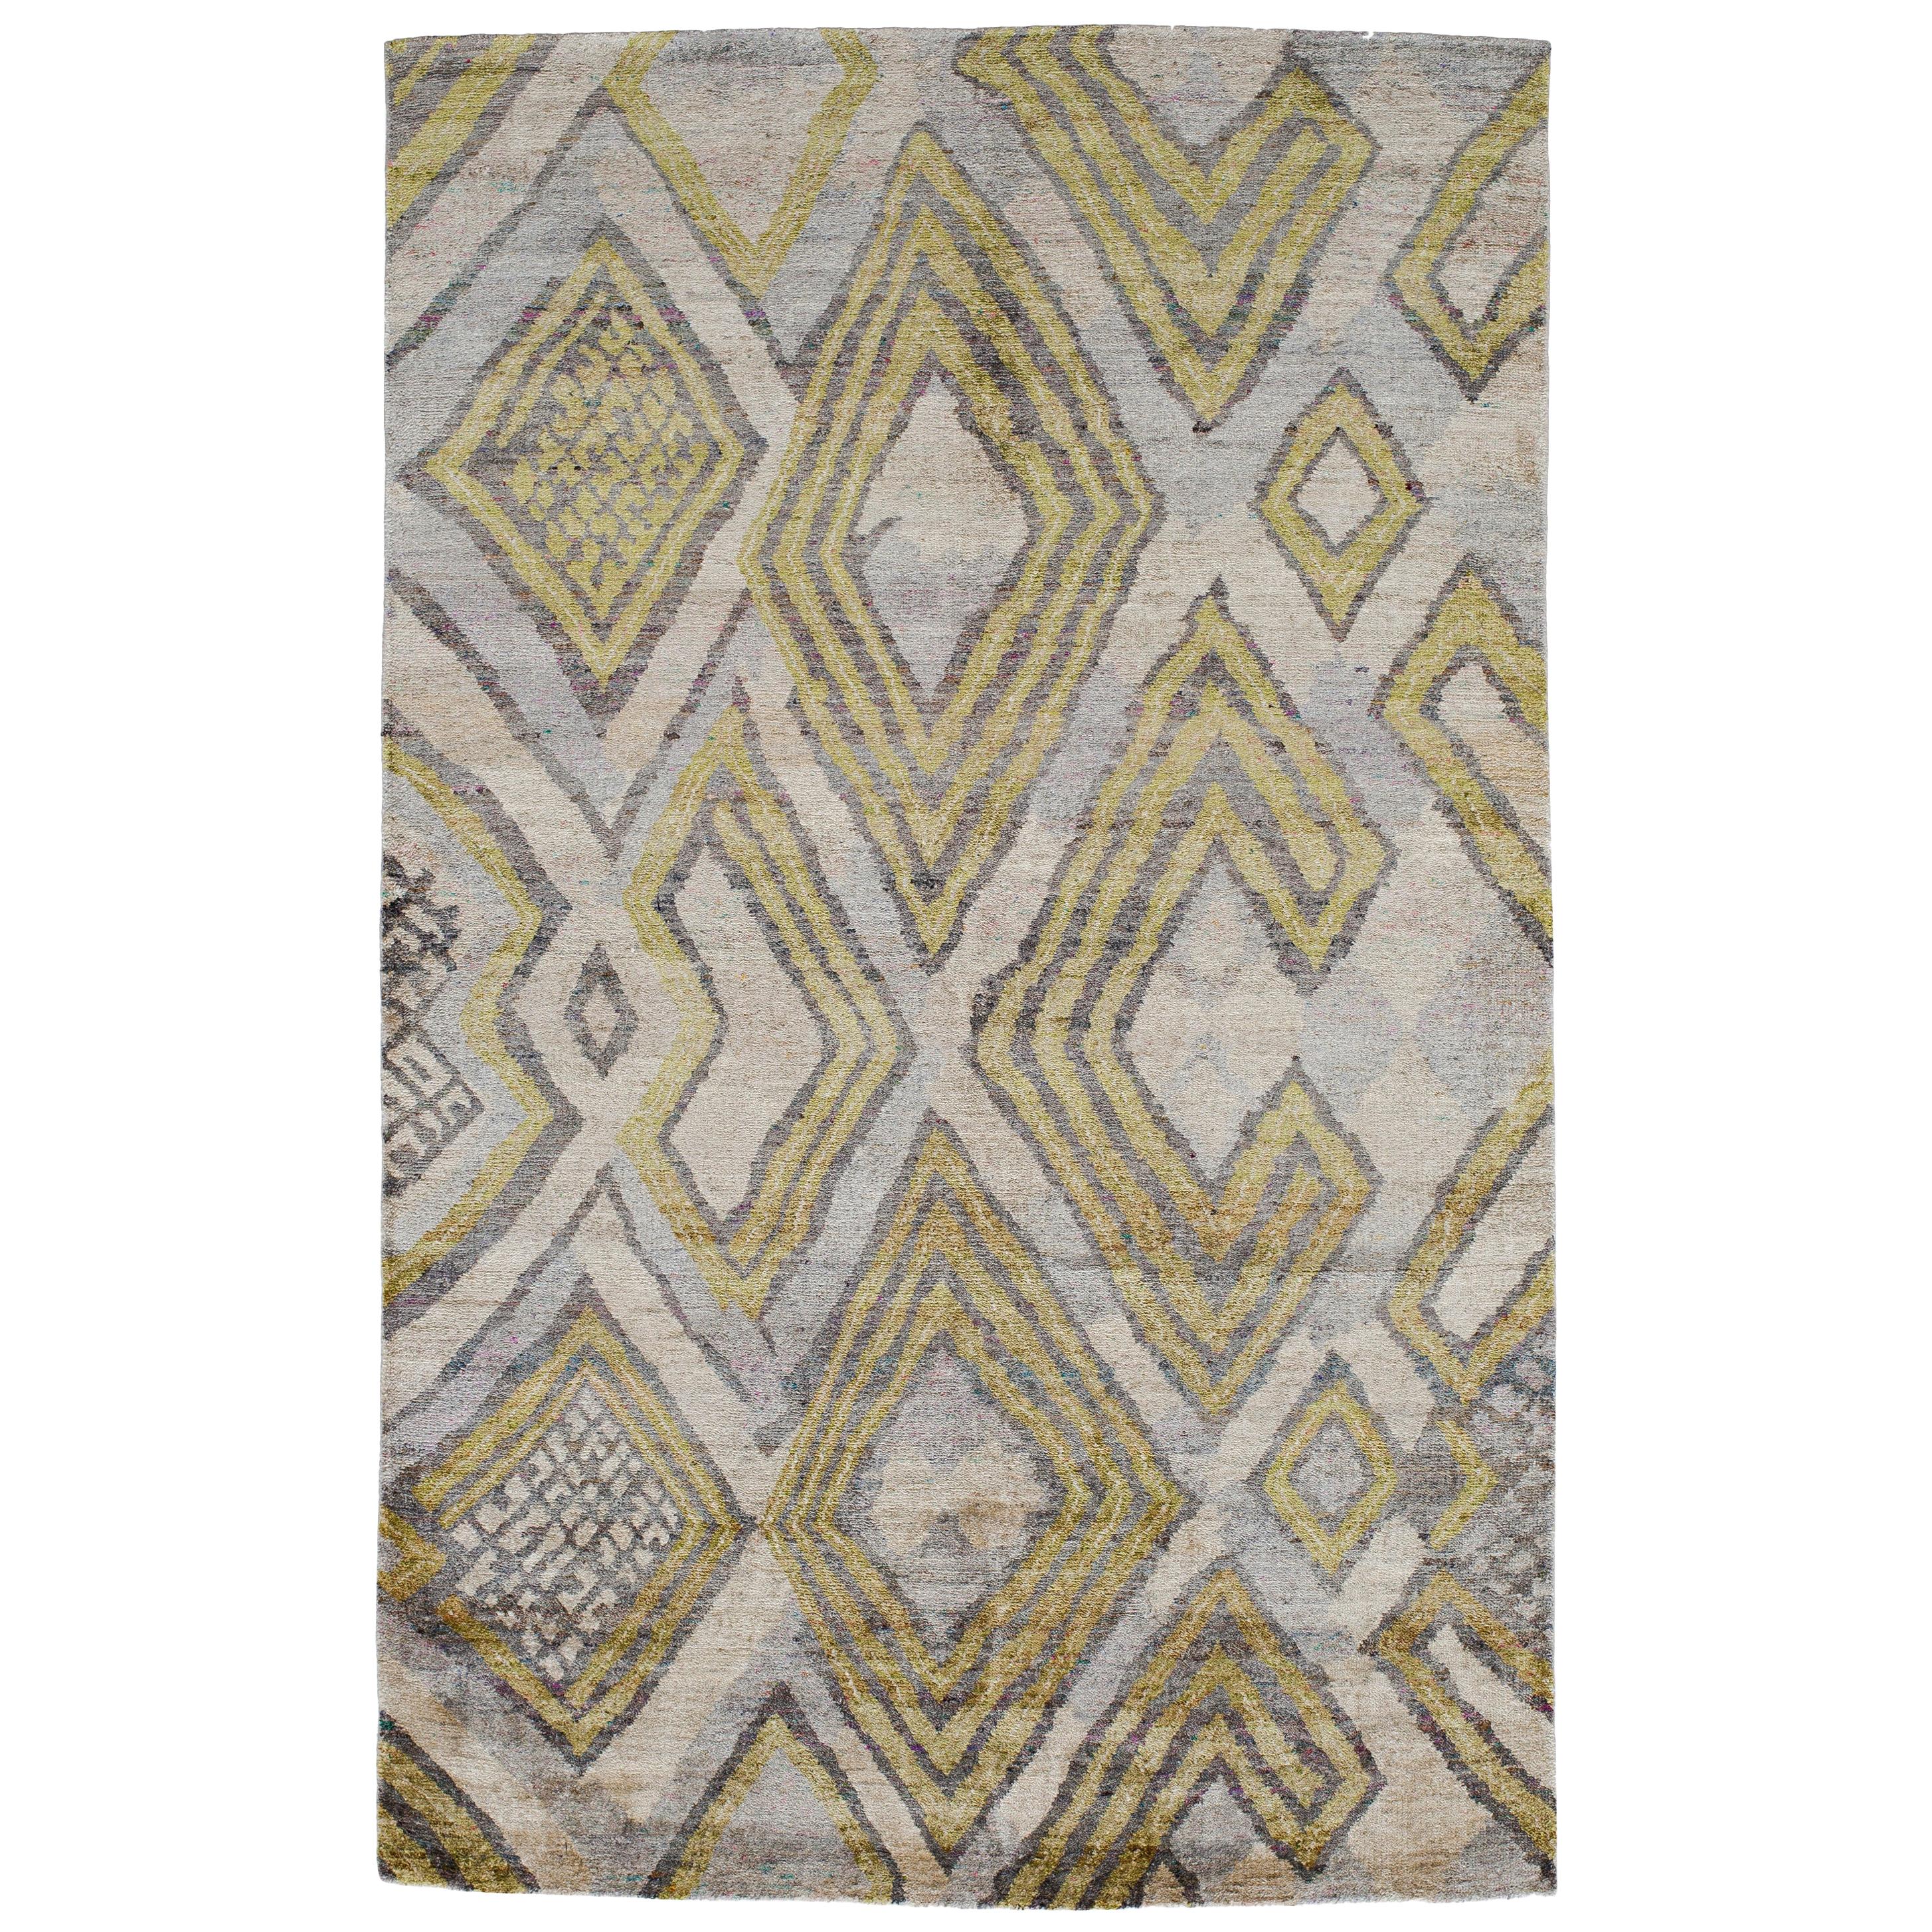 Silver White Lime Green Powder Blue African Tribal Silk Hand Knotted Rug